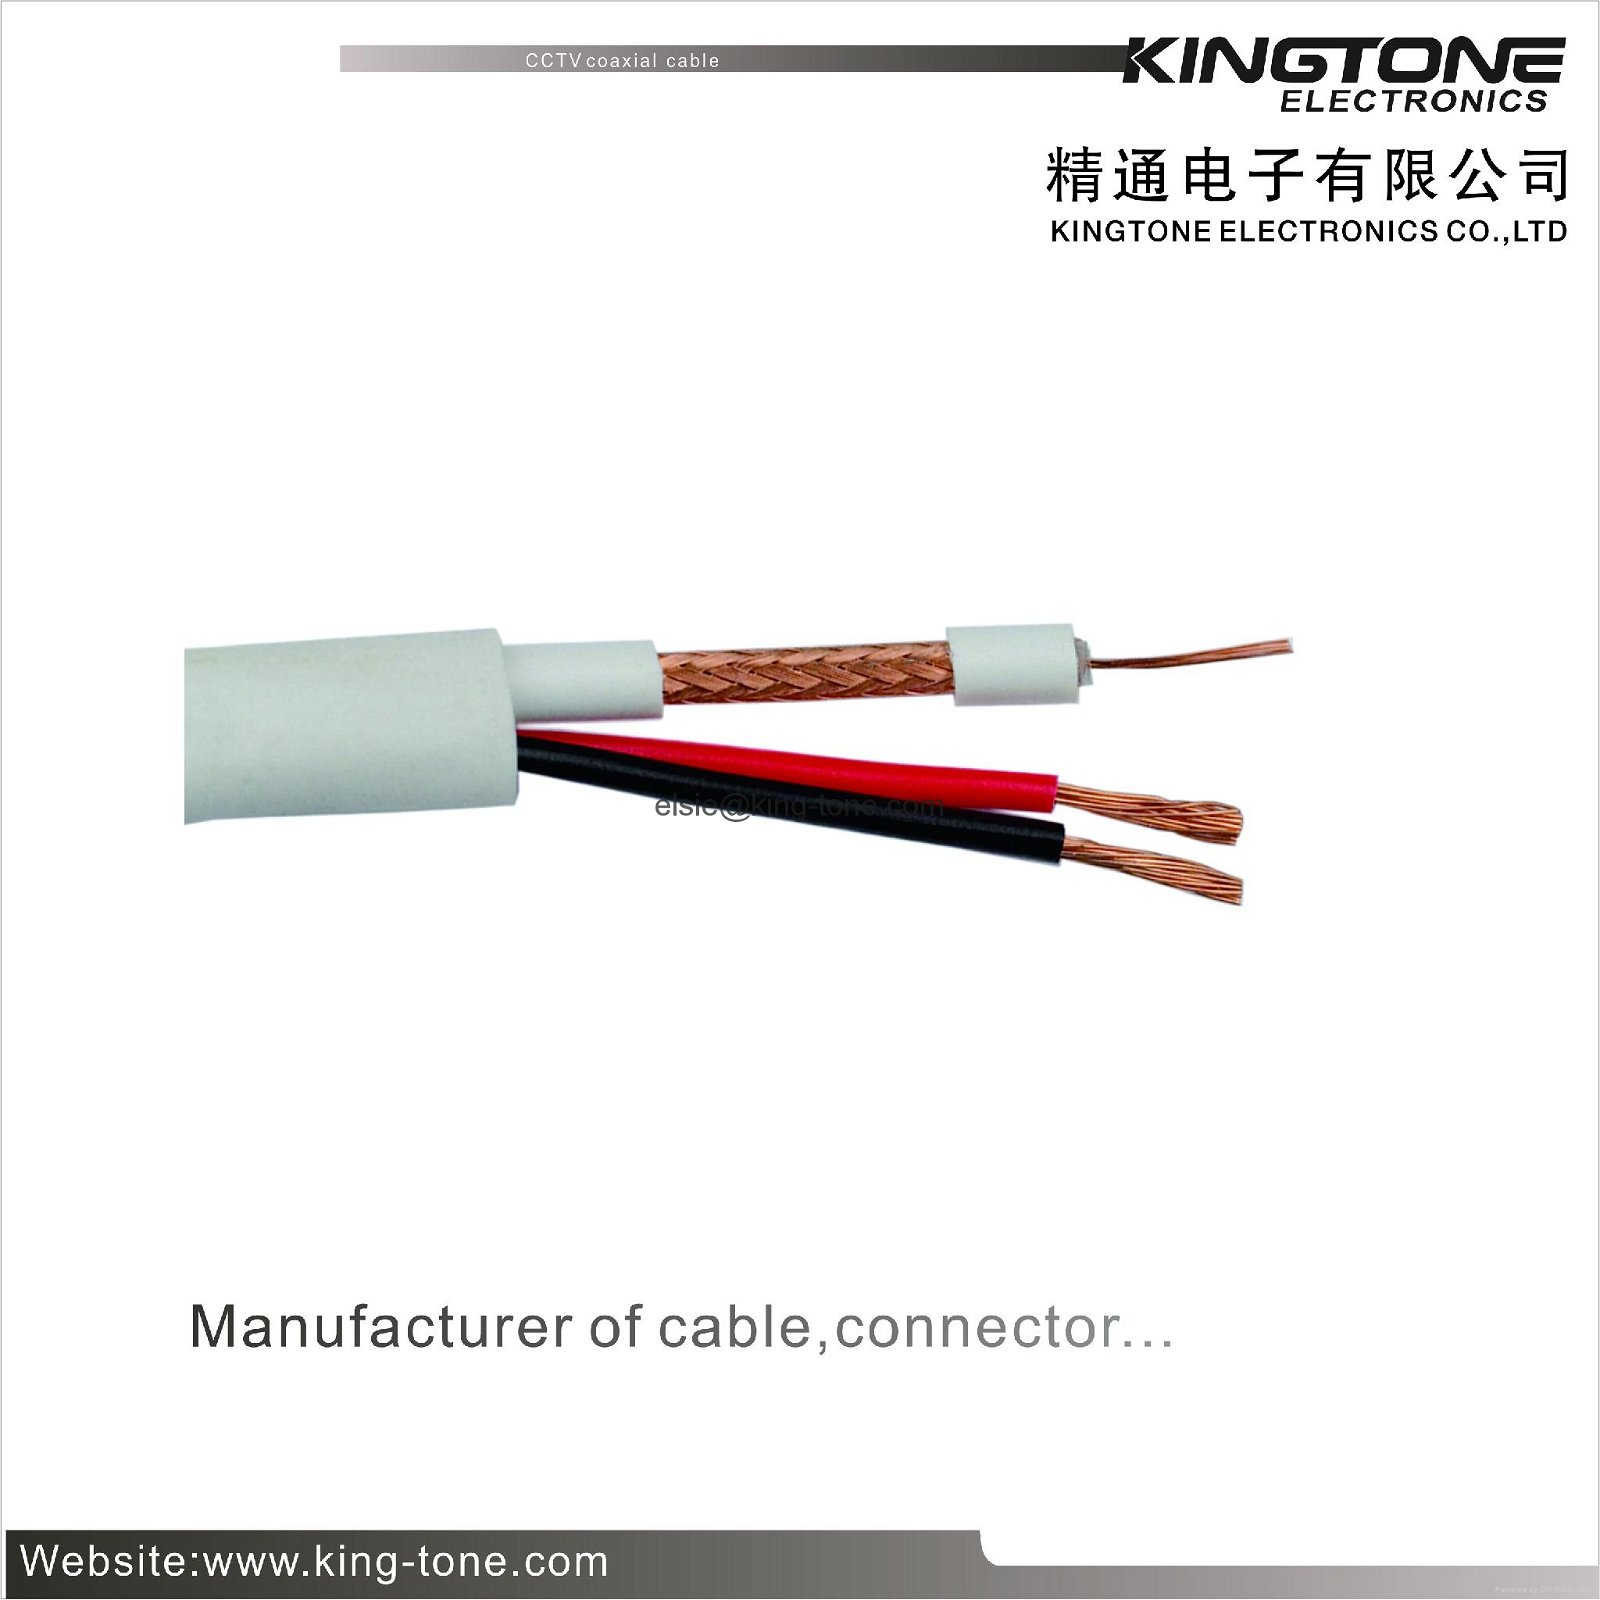 CCTV Coaxial Cable RG59 + 18AWG / 2C 95% CCA Braid Siamese Cable CMR Standard